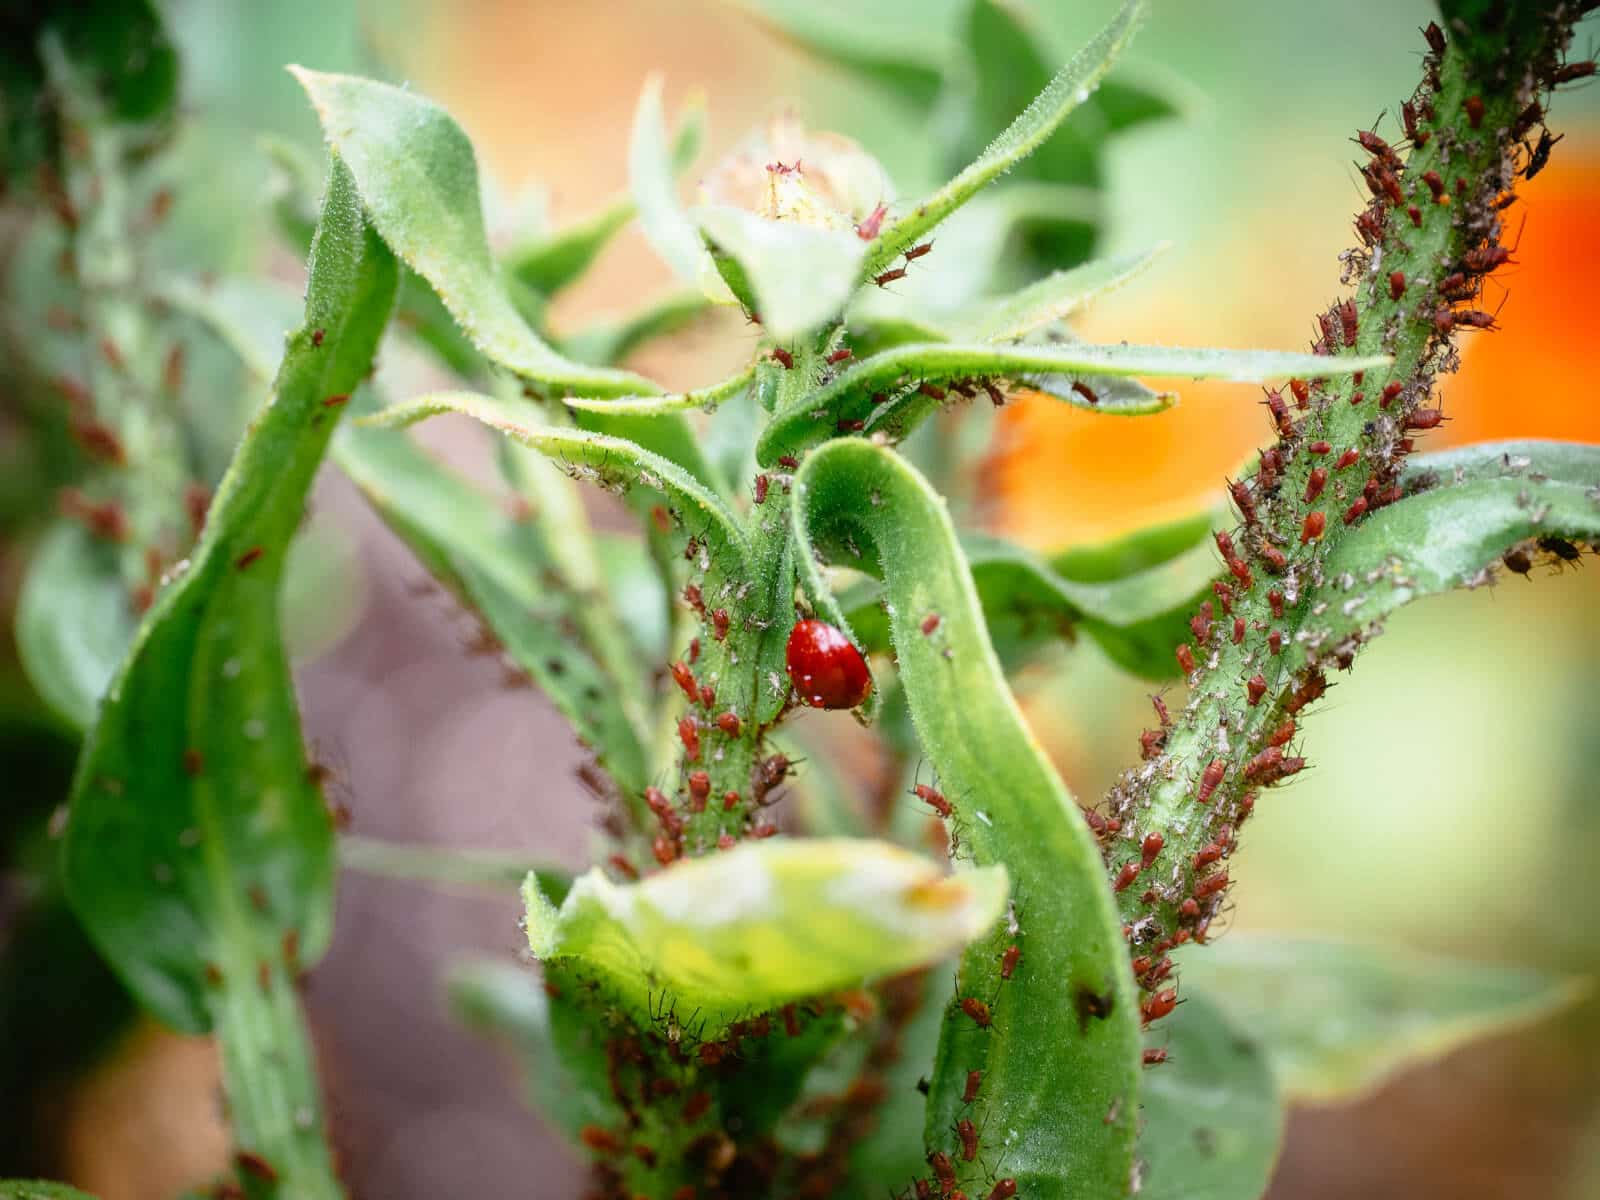 Introduce beneficial insects like ladybugs to your garden to help get rid of aphids